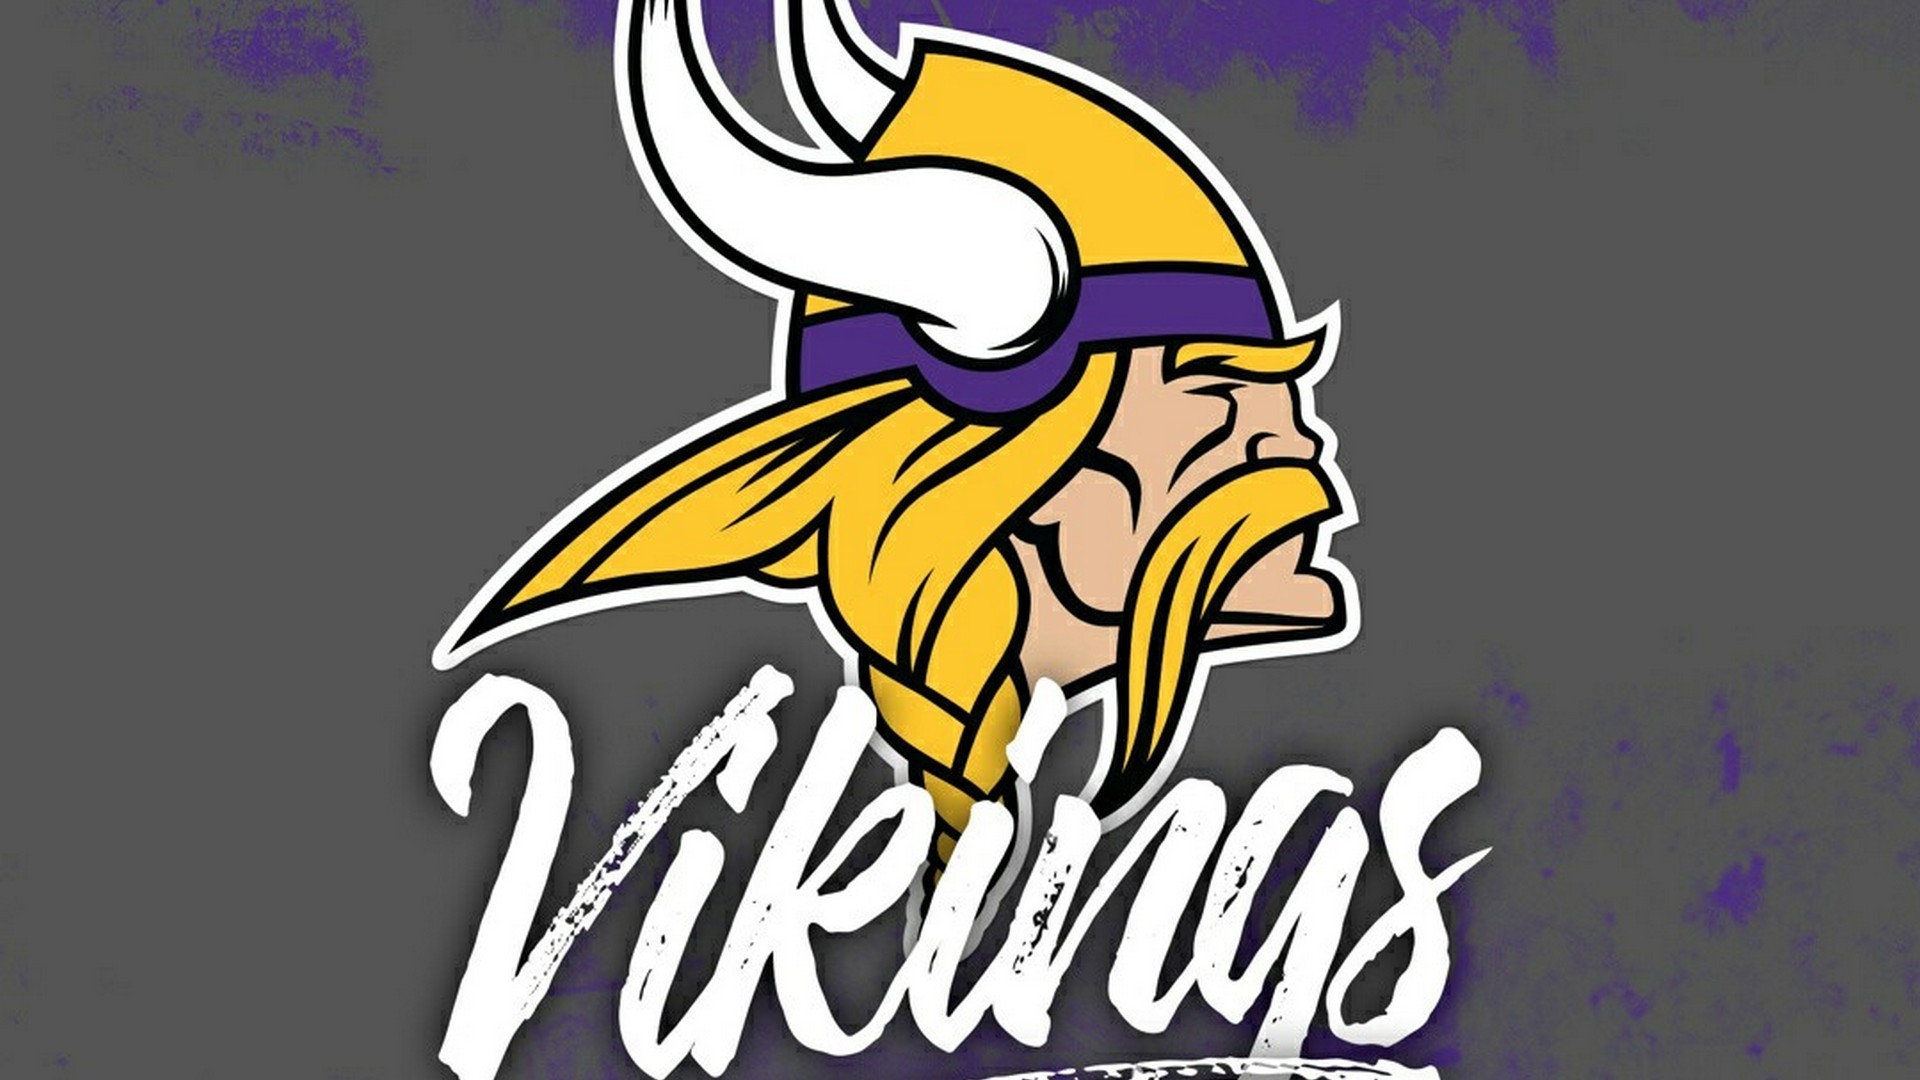 PC Wallpaper Minnesota Vikings with high-resolution 1920x1080 pixel. Download and set as wallpaper for Desktop Computer, Apple iPhone X, XS Max, XR, 8, 7, 6, SE, iPad, Android